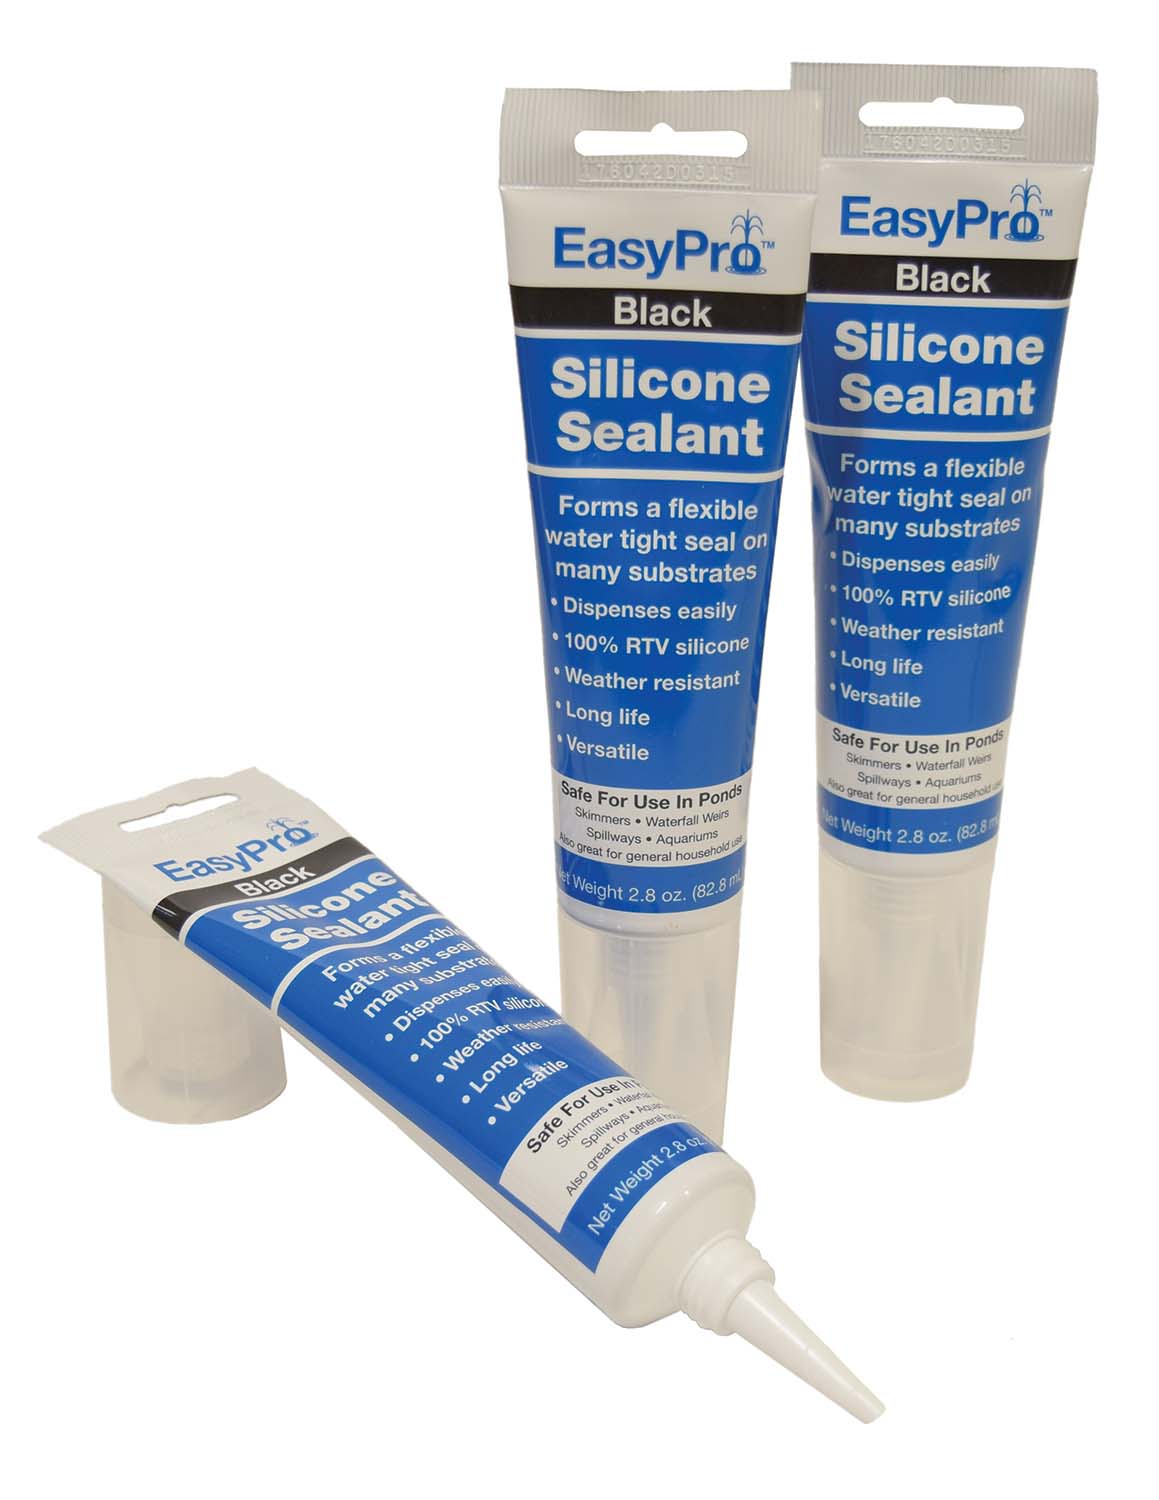 What are The uses of Silicone Sealant and its Types?